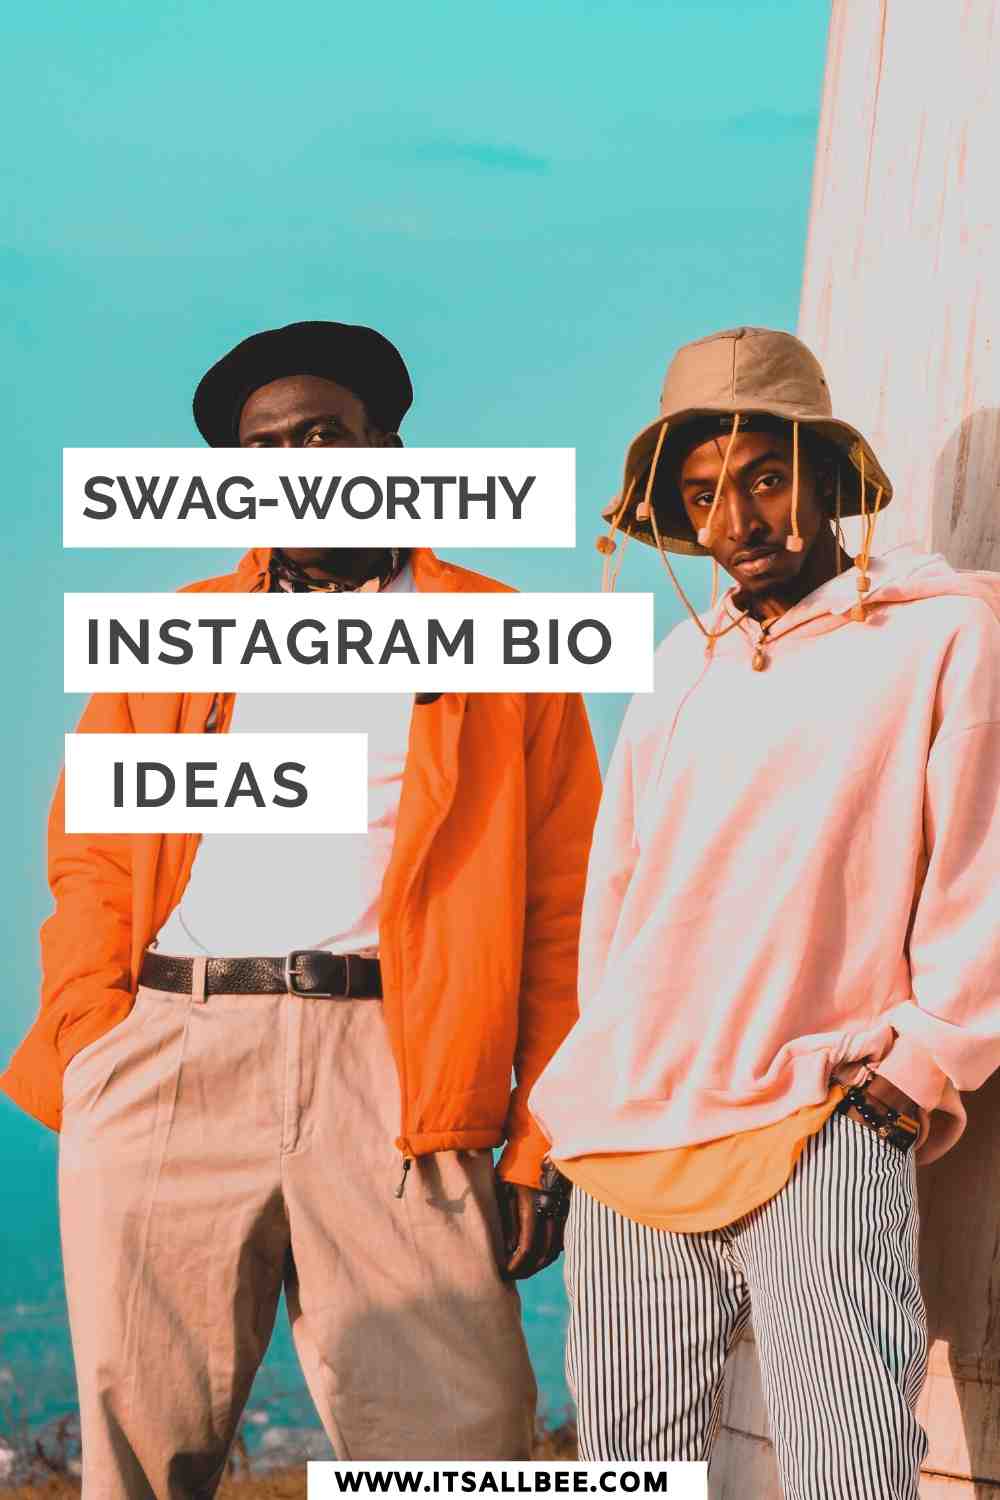 150+ Quotes & Captions Ideas For Instagram Bios For Guys - ItsAllBee | Solo  Travel & Adventure Tips